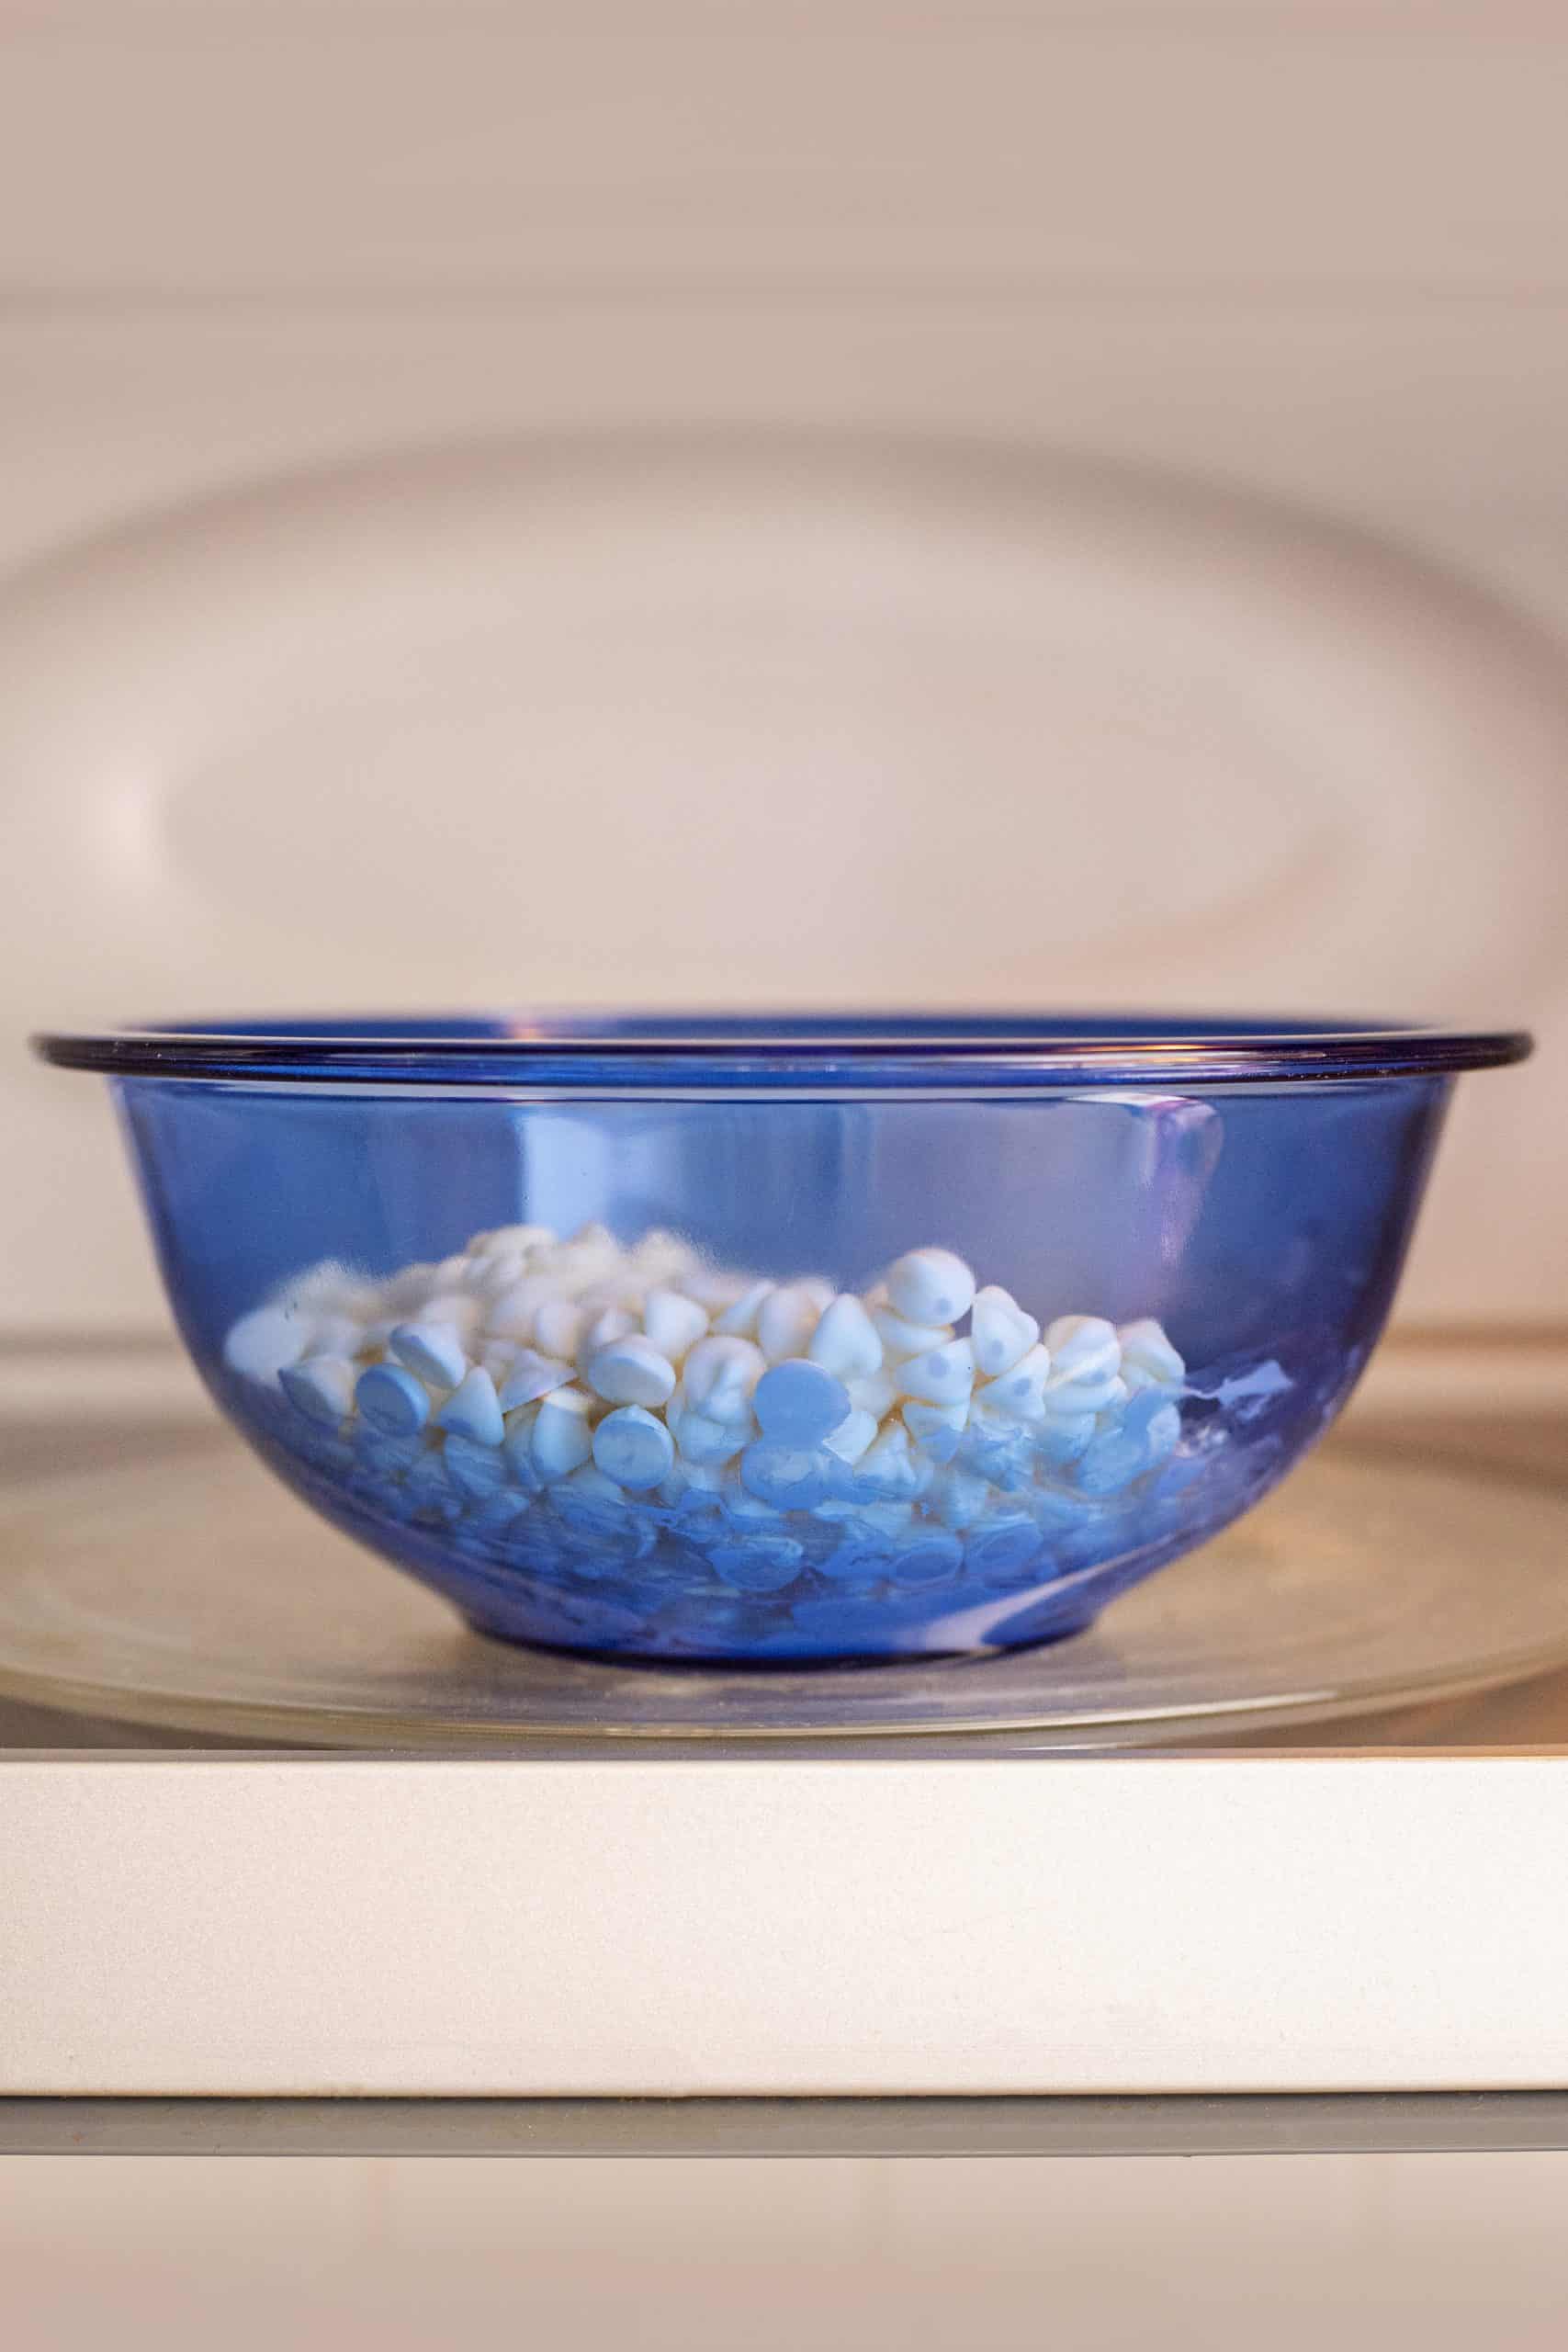 white chocolate chips in a blue bowl inside the microwave.